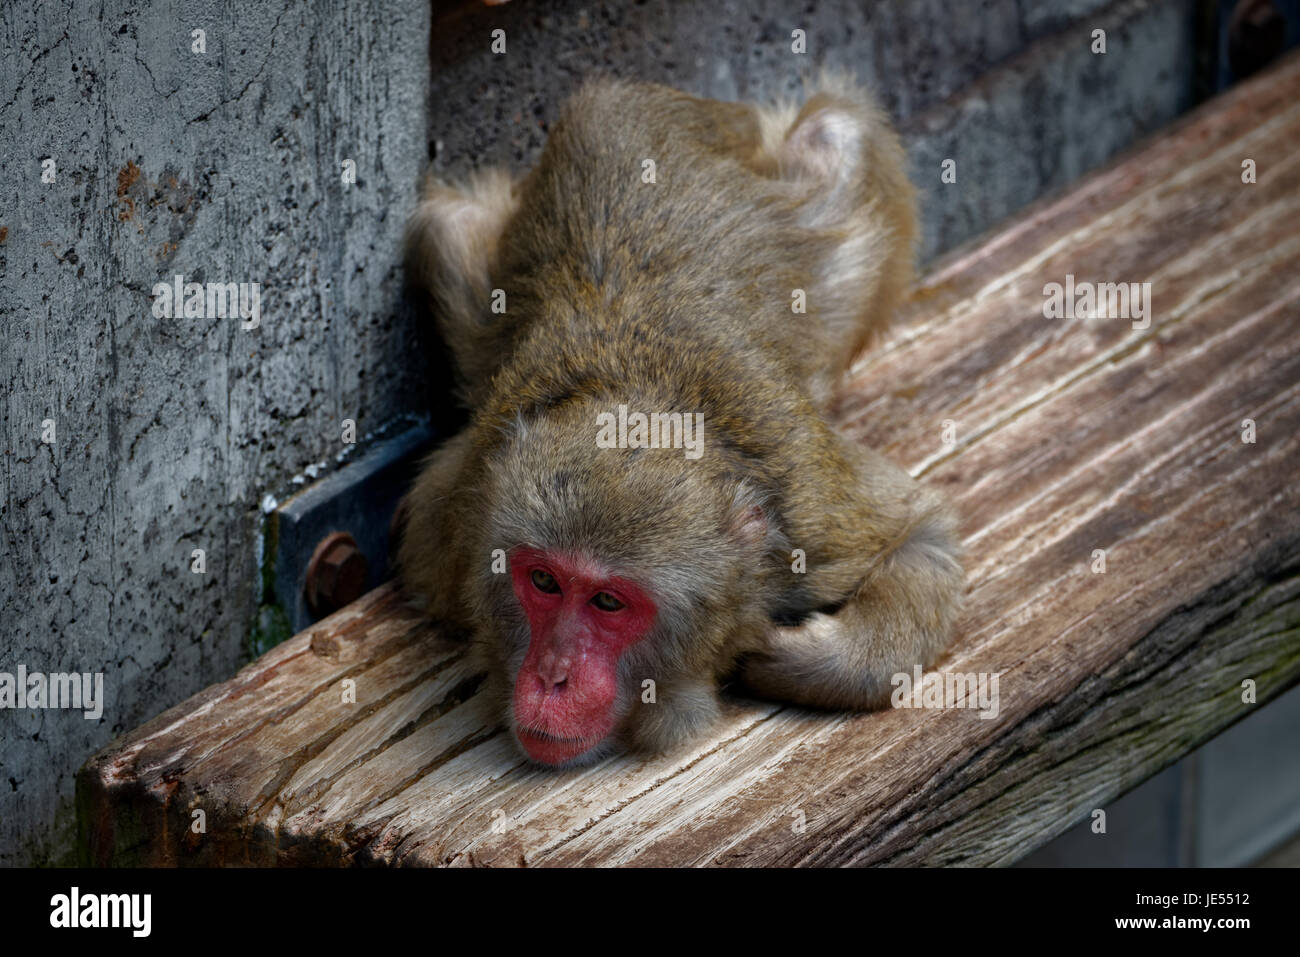 A totally relaxed Japanese Macaque (Macaca fuscata) is lying on its favourite place: a wooden board. Stock Photo